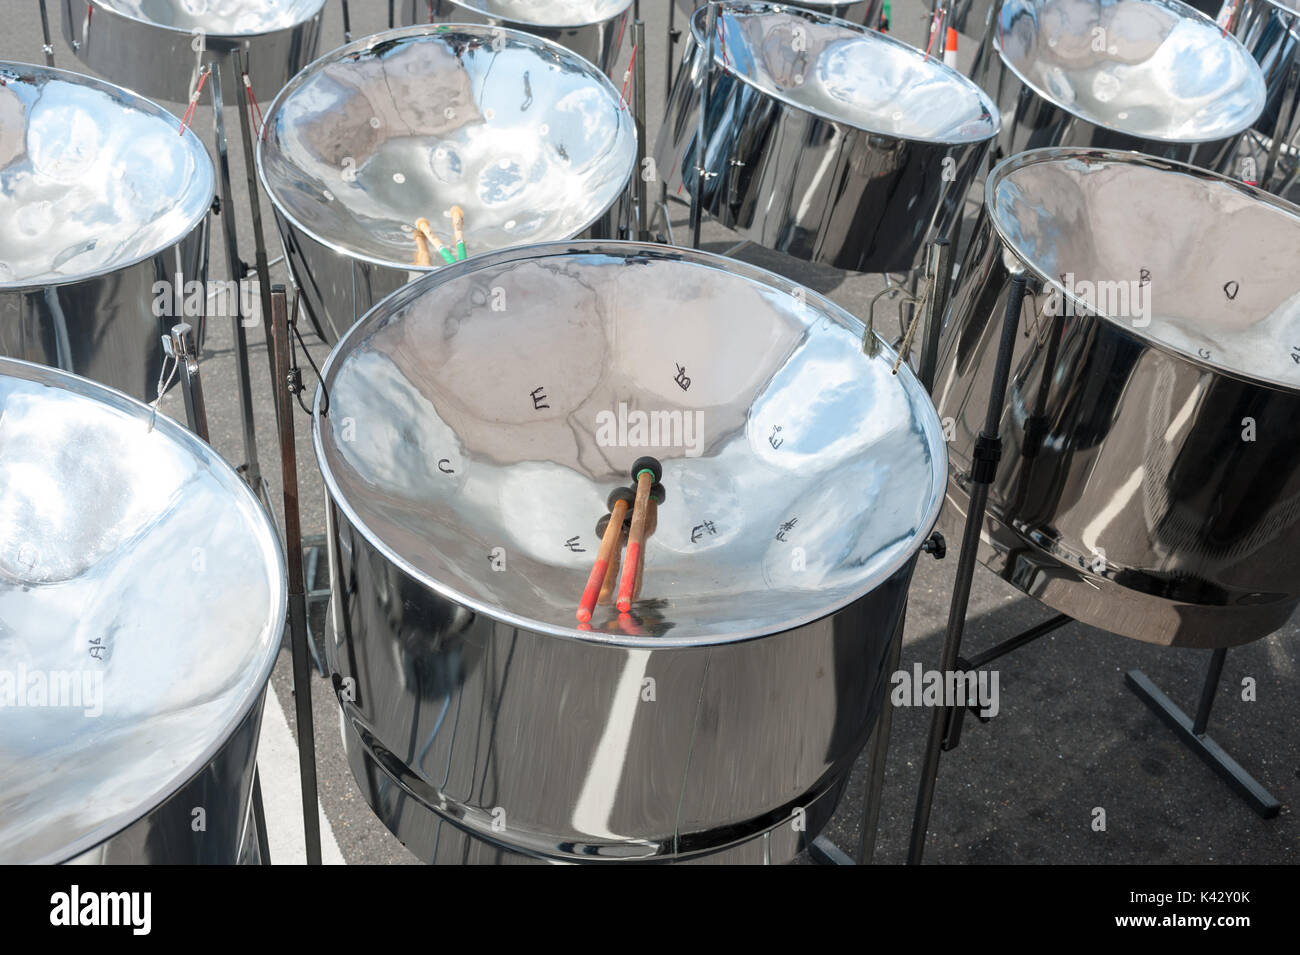 Steel Drums Caribbean High Resolution Stock Photography and Images - Alamy